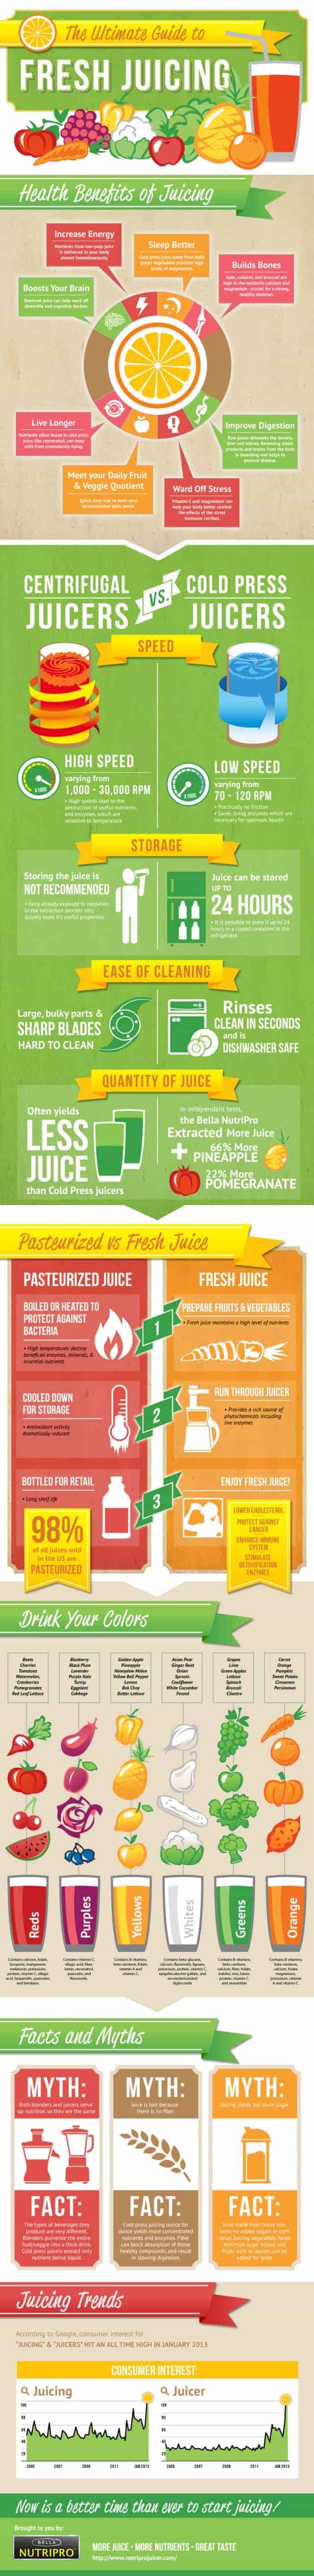 Ultimate Guide to Fresh Juicing